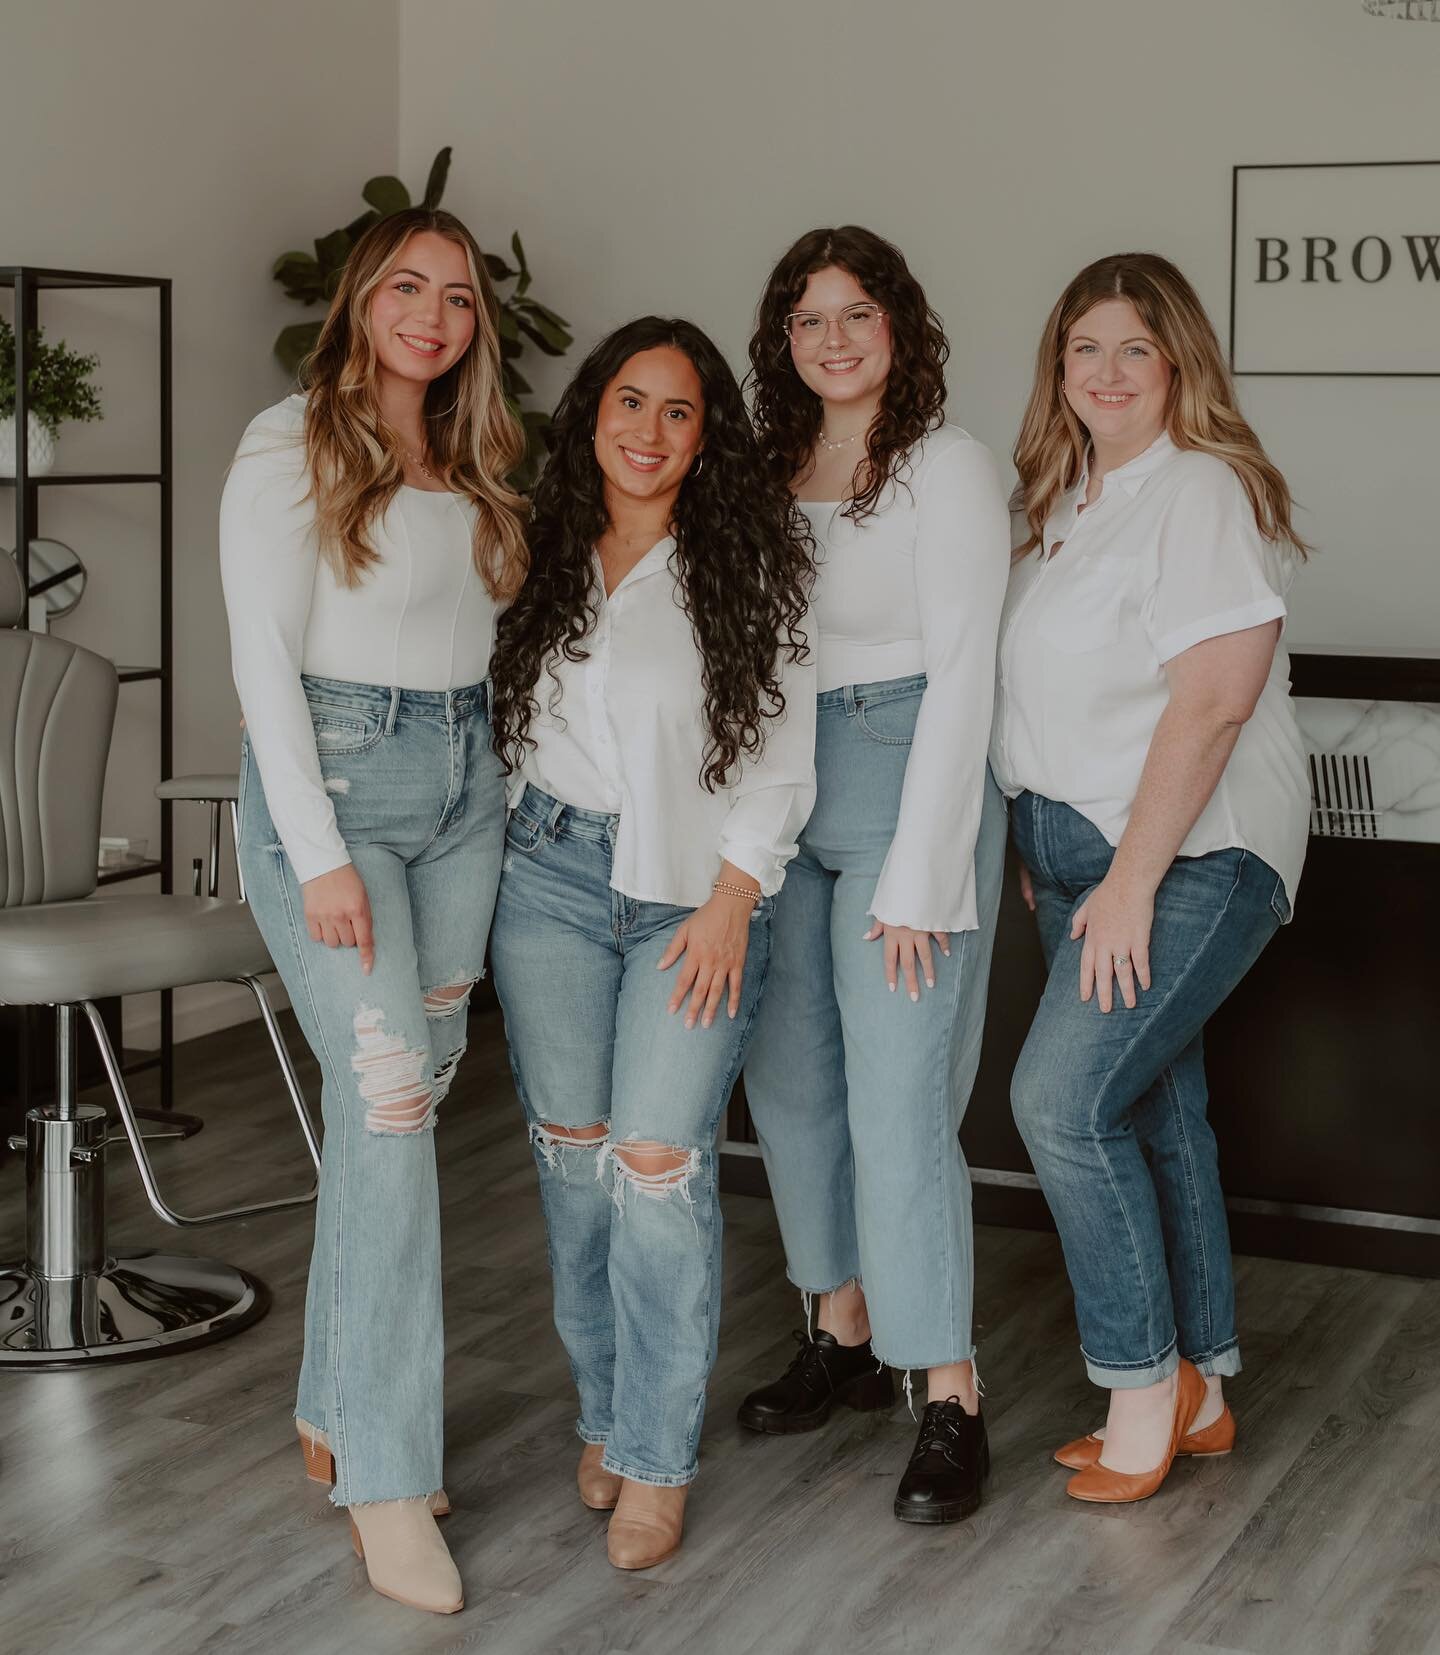 At Brows &amp; Beauty Company we believe in quality over quantity when it comes to our team members. Our team of experts specializes in all things brows and have years of experience combined with extensive education and trainings to ensure our client